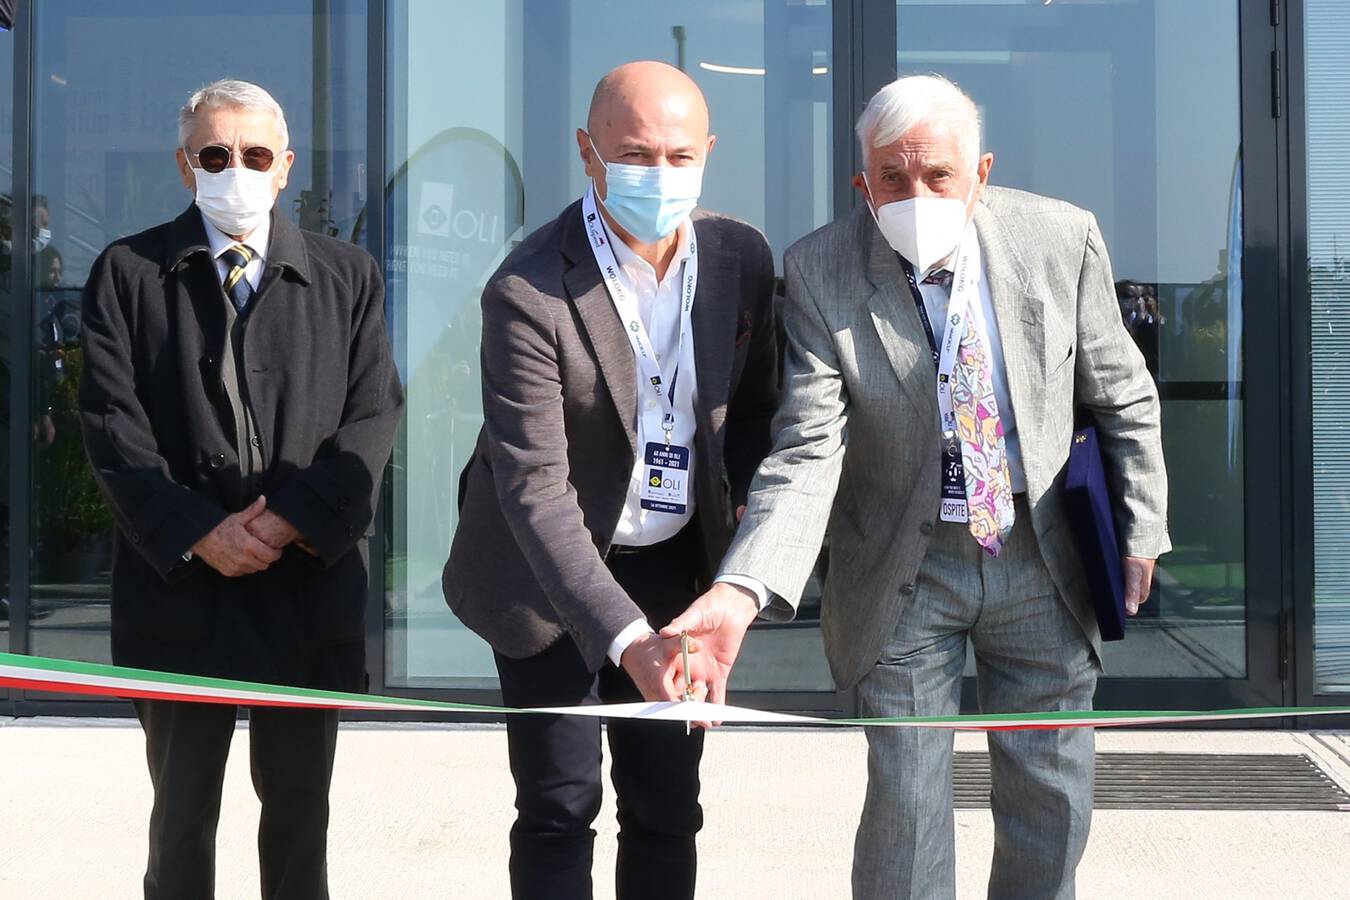 60 years of OLI spa End of 2021 gave two  reasons to celebrate for OLI Spa: the opening of its new facility in Medolla, North Italy, and the 60-year anniversary of the company.